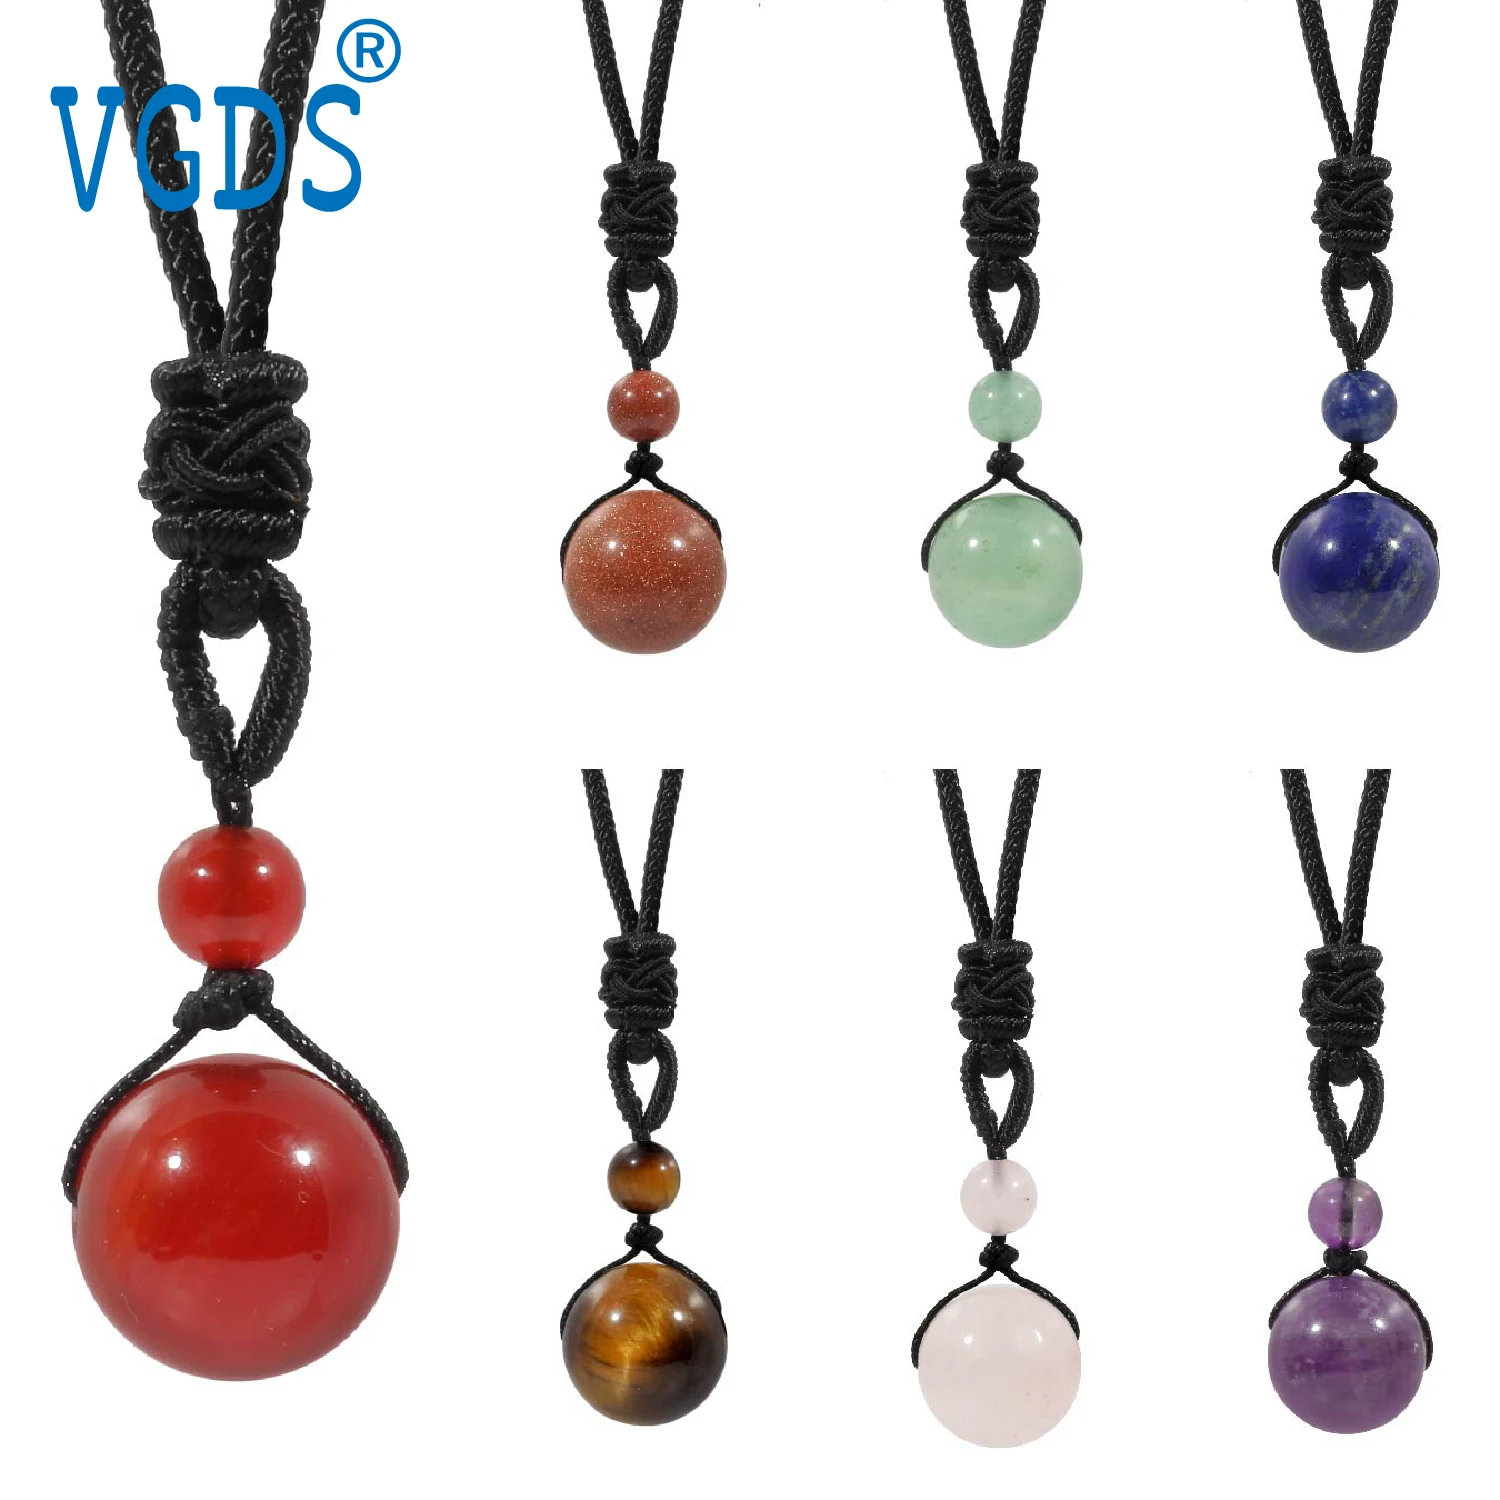 Reiki Stone Natural Crystal Quartz Lucky Bead Round Ball Healing Energy Charms Pendants Necklaces Men Women Making Jewelry Gifts